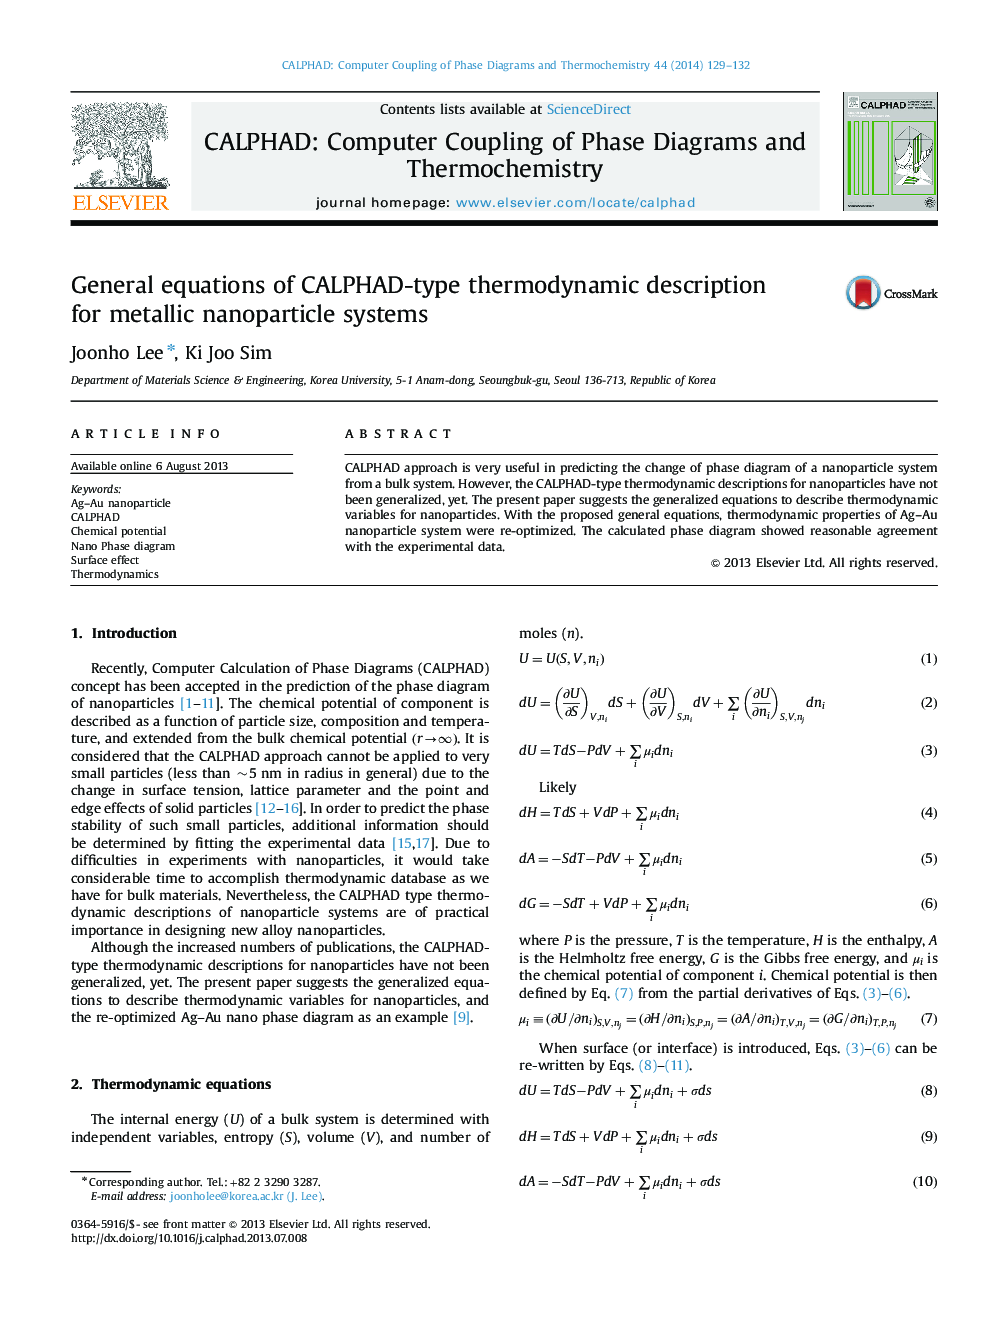 General equations of CALPHAD-type thermodynamic description for metallic nanoparticle systems